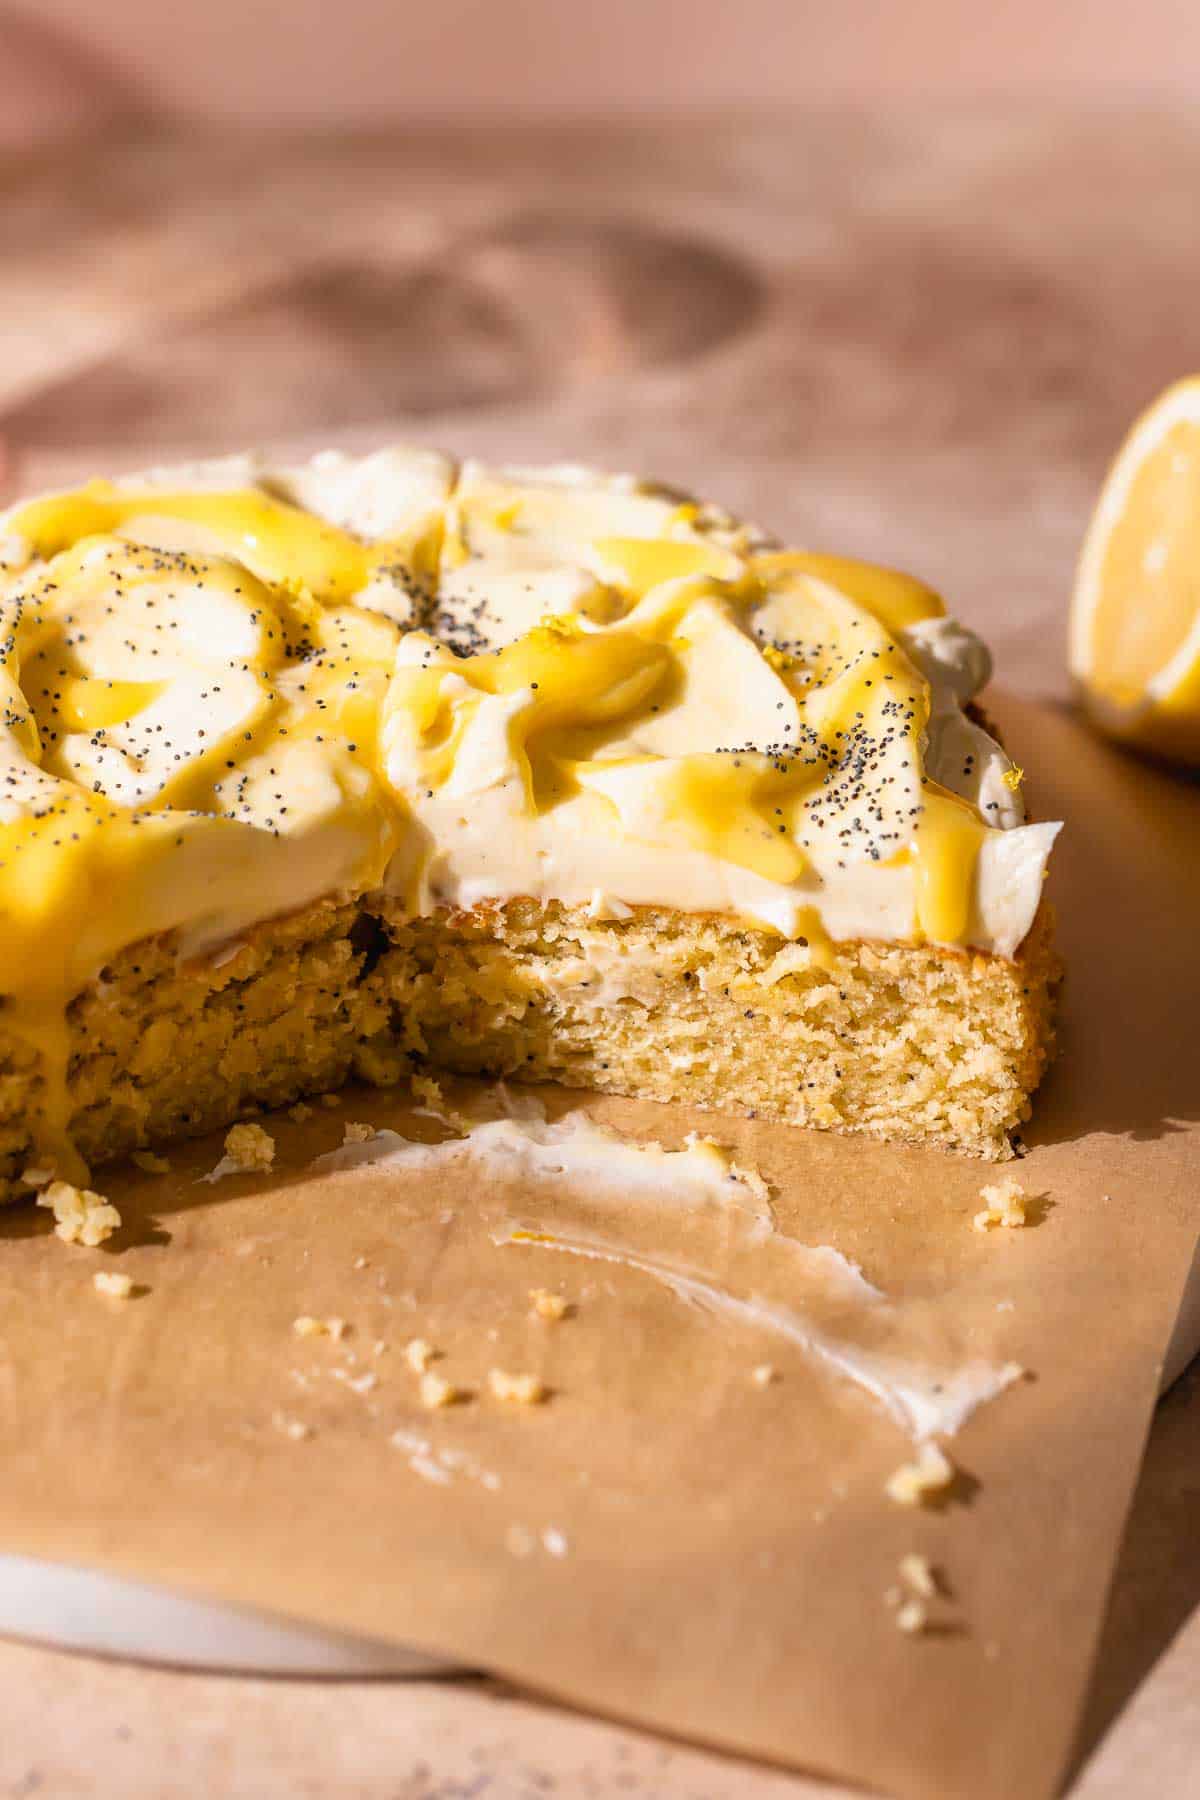 Lemon poppy seed cake with cream cheese frosting and lemon curd on top.